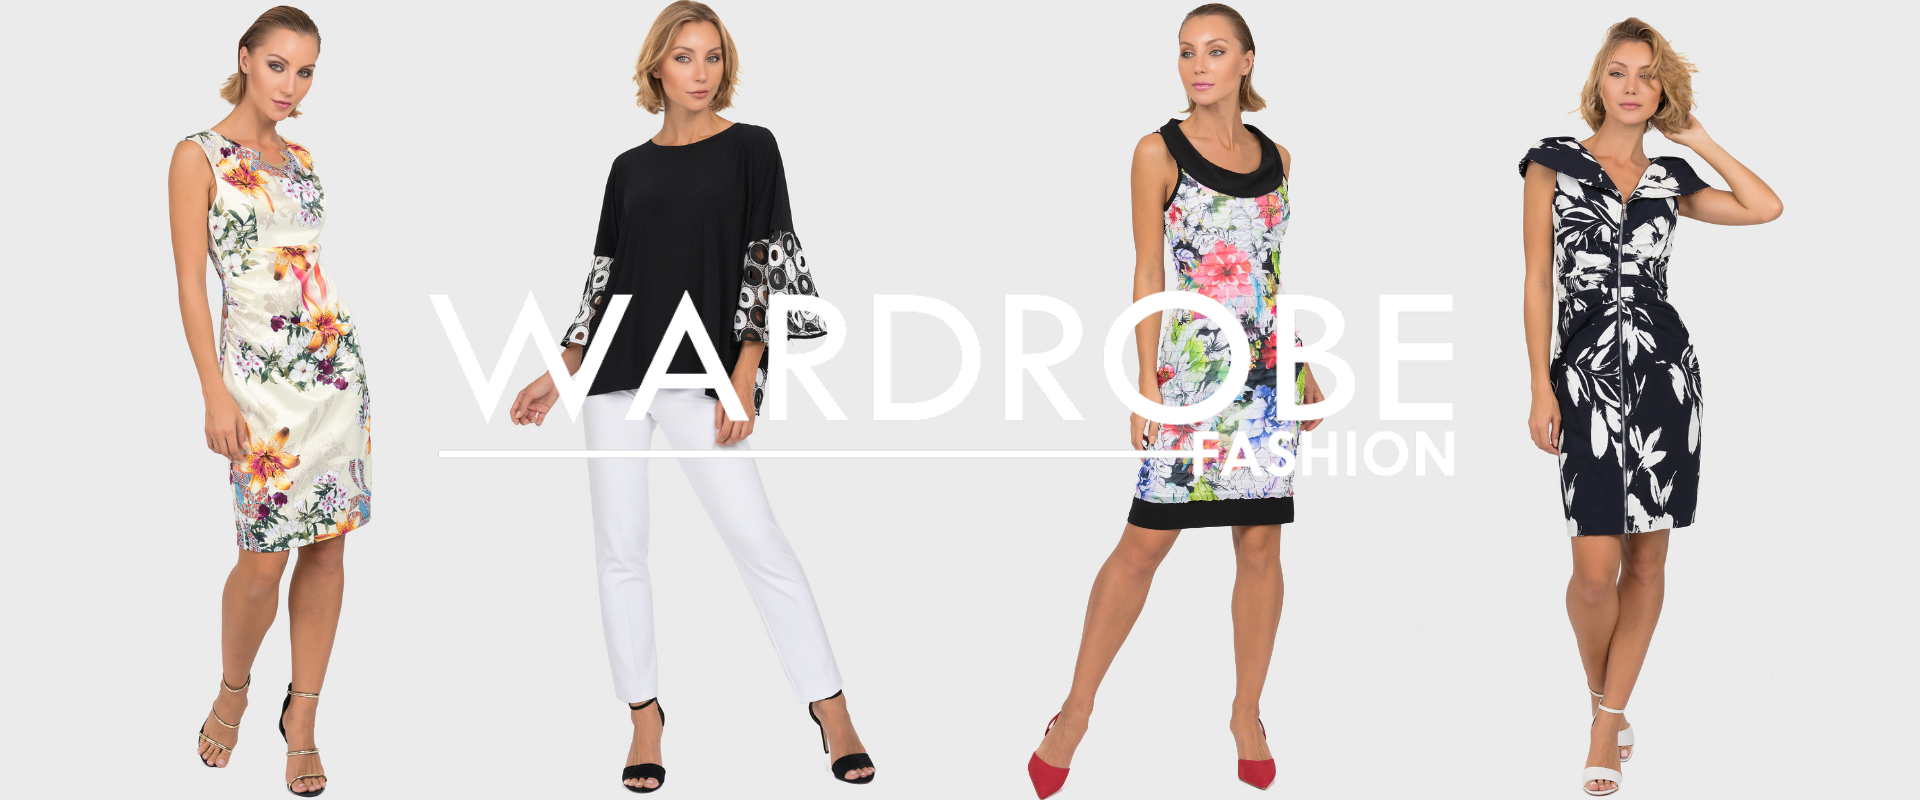 The Wardrobe extra 15% OFF on first order when you sign up